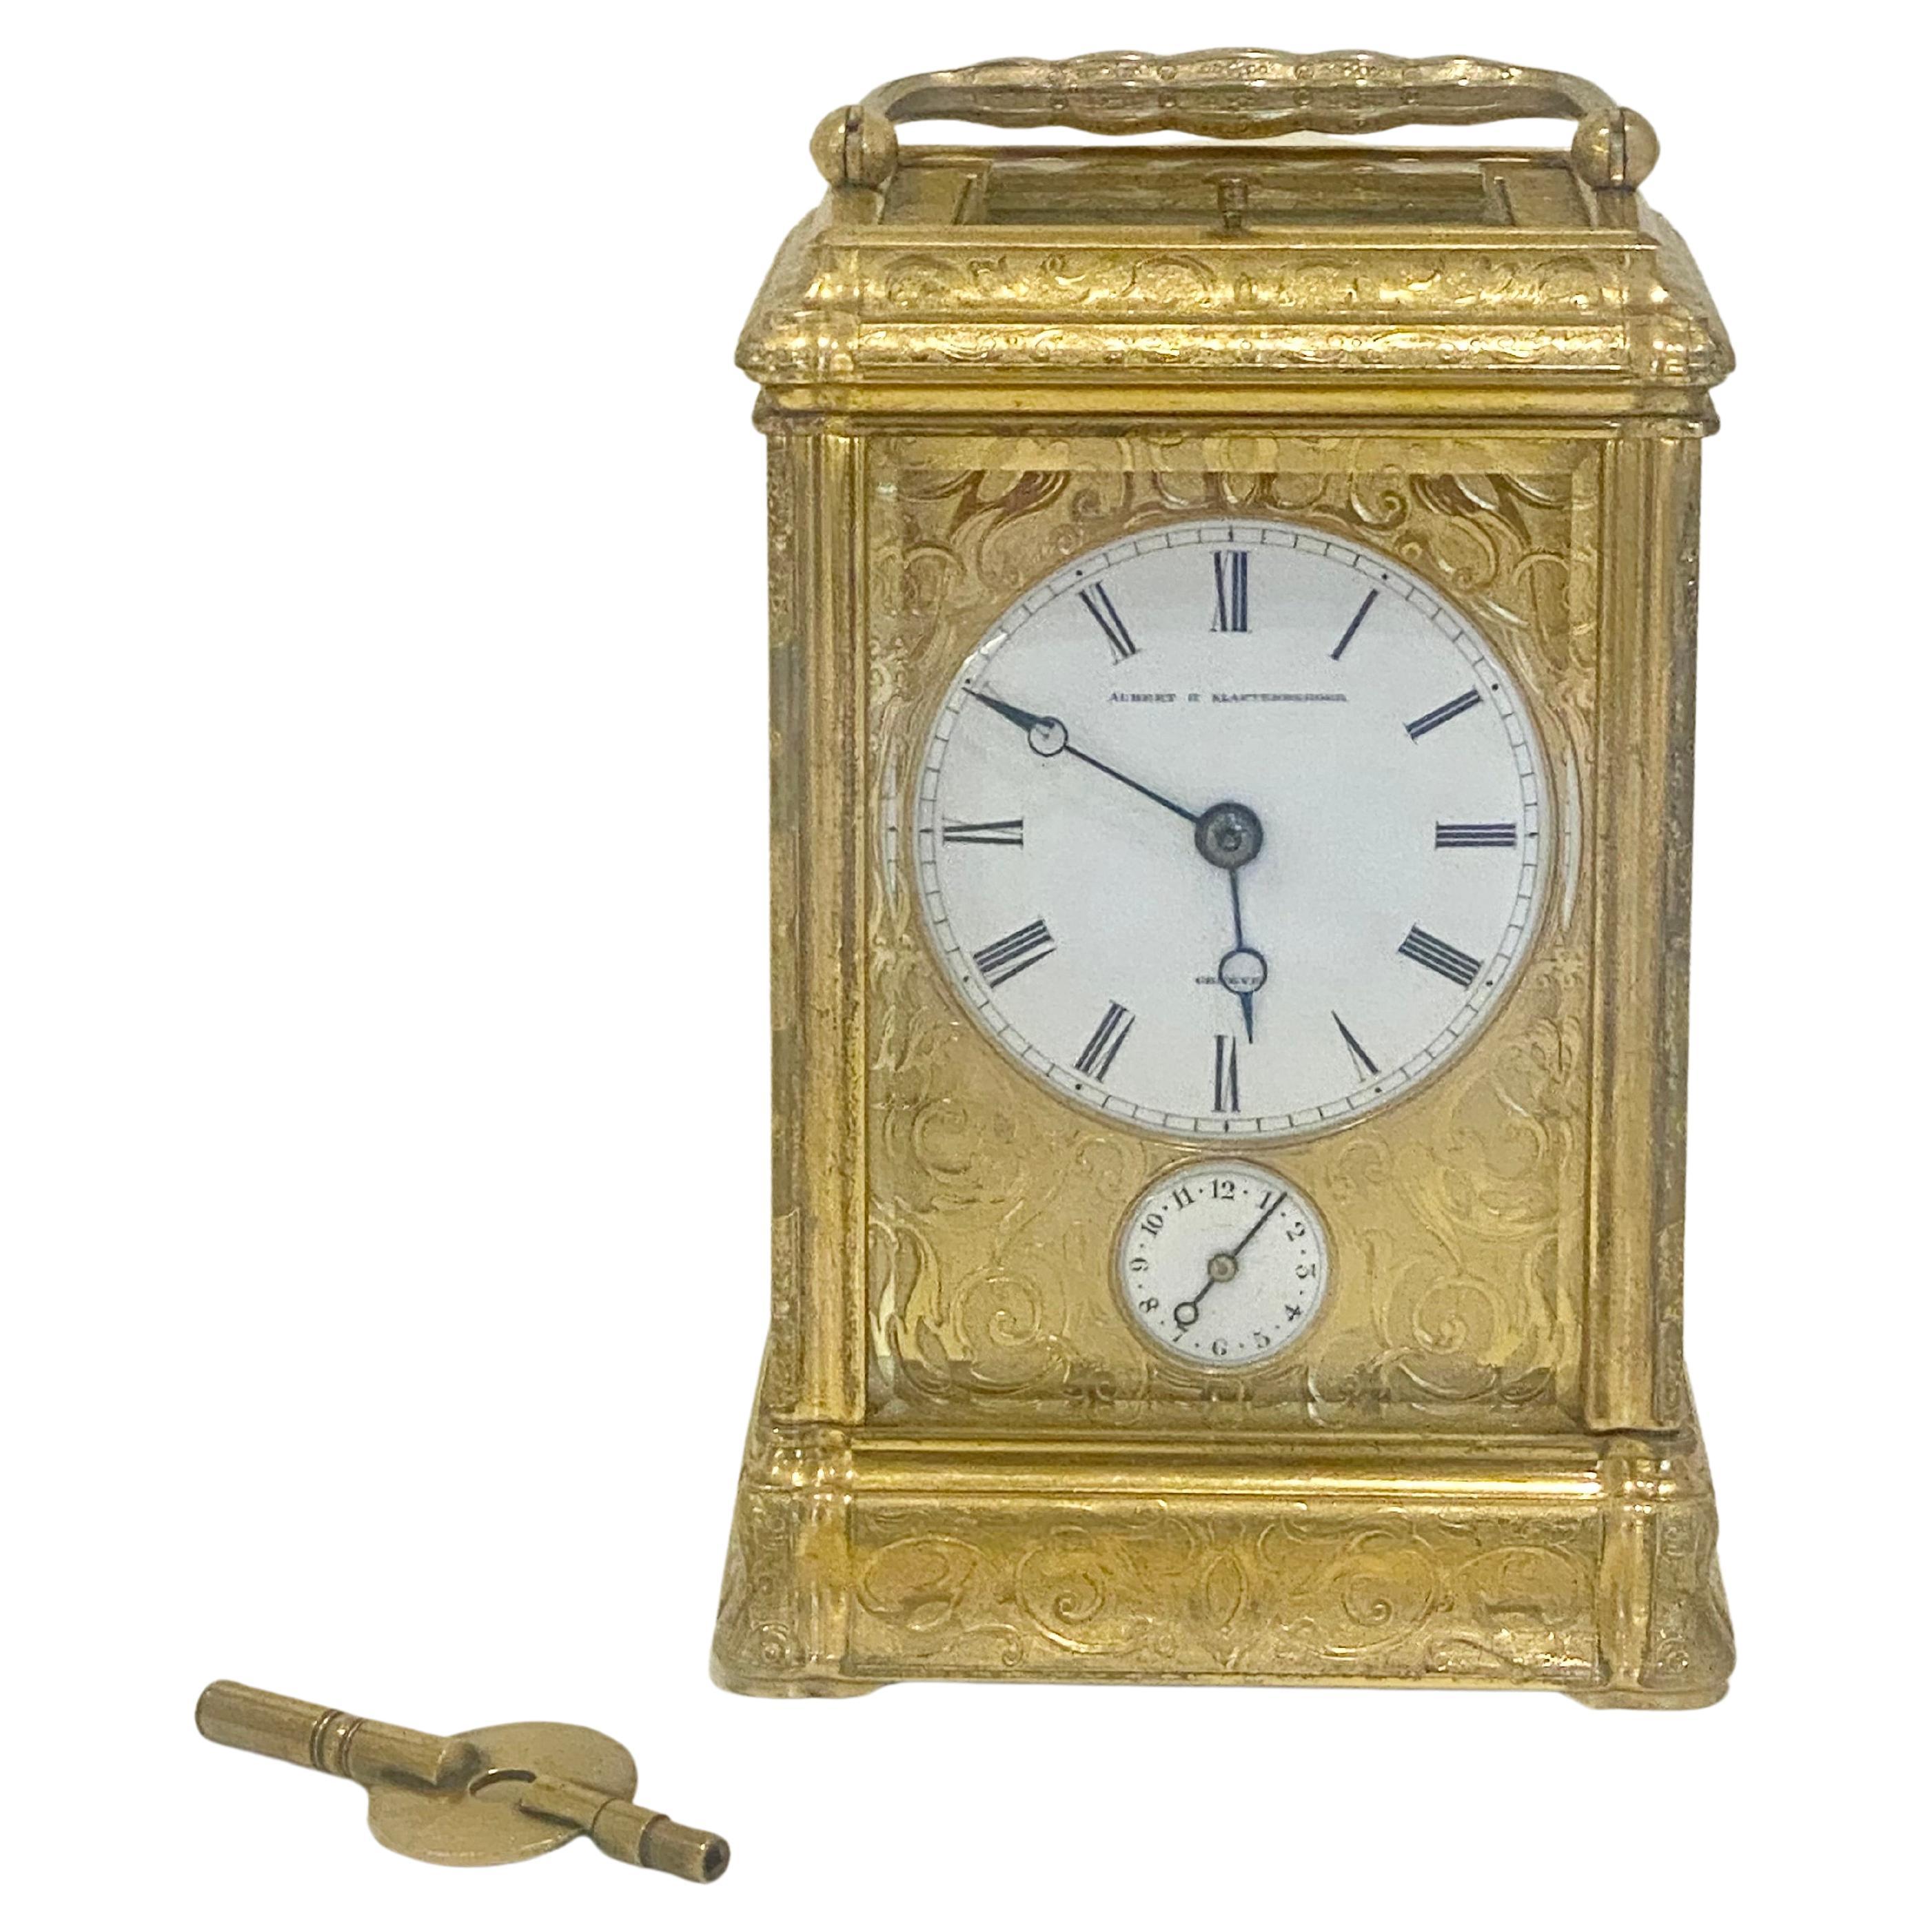 A fully all over engraved gilt bronze carriage clock geneve circa 1870 and retailed in London by Aubert & Klaftenberger.
The gorge case of characteristic design, profusely engraved to all sides with foliate scrolls and flowers on a matted ground,